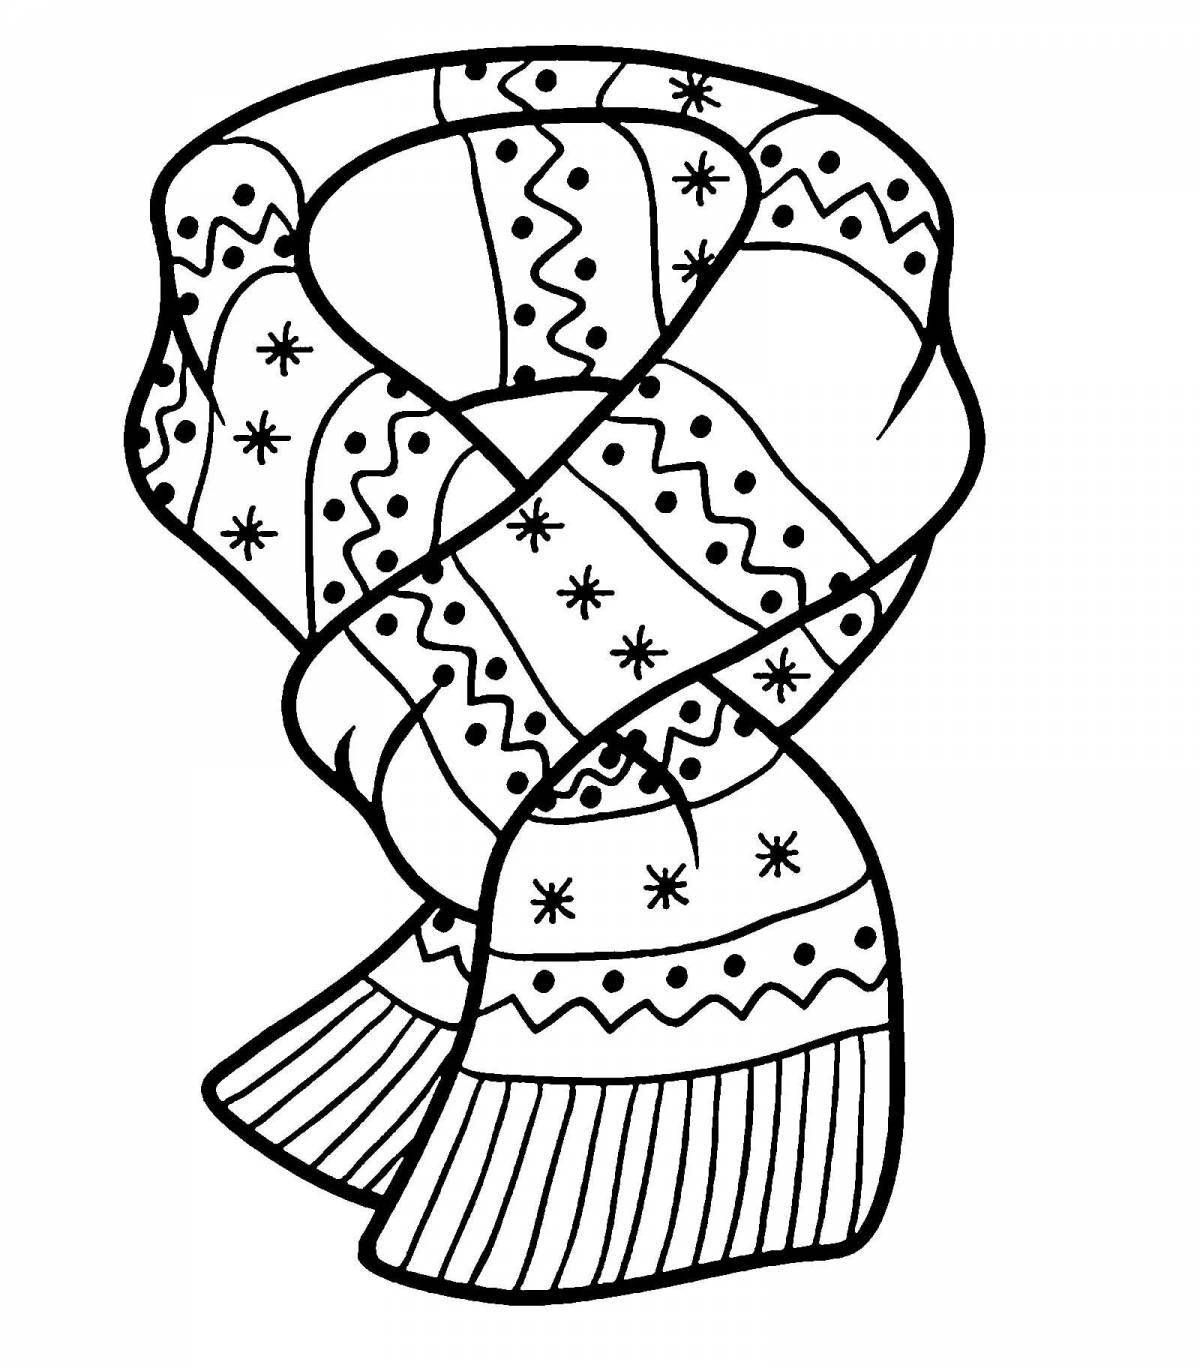 Coloring scarves for children 3-4 years old